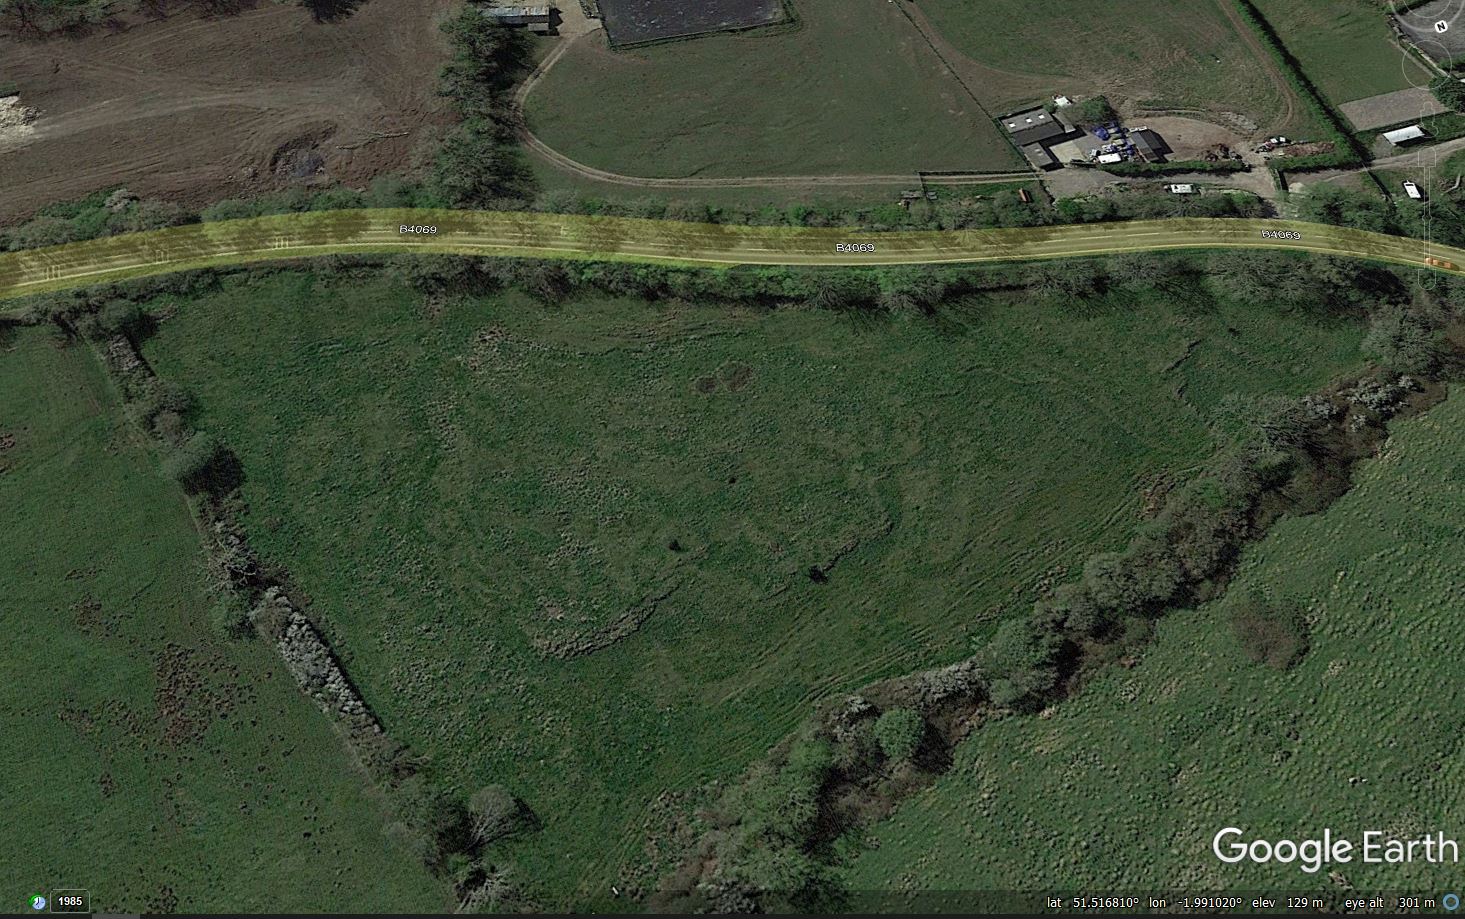 Google Earth image of the site of the landslide at Lyneham in southern England. 